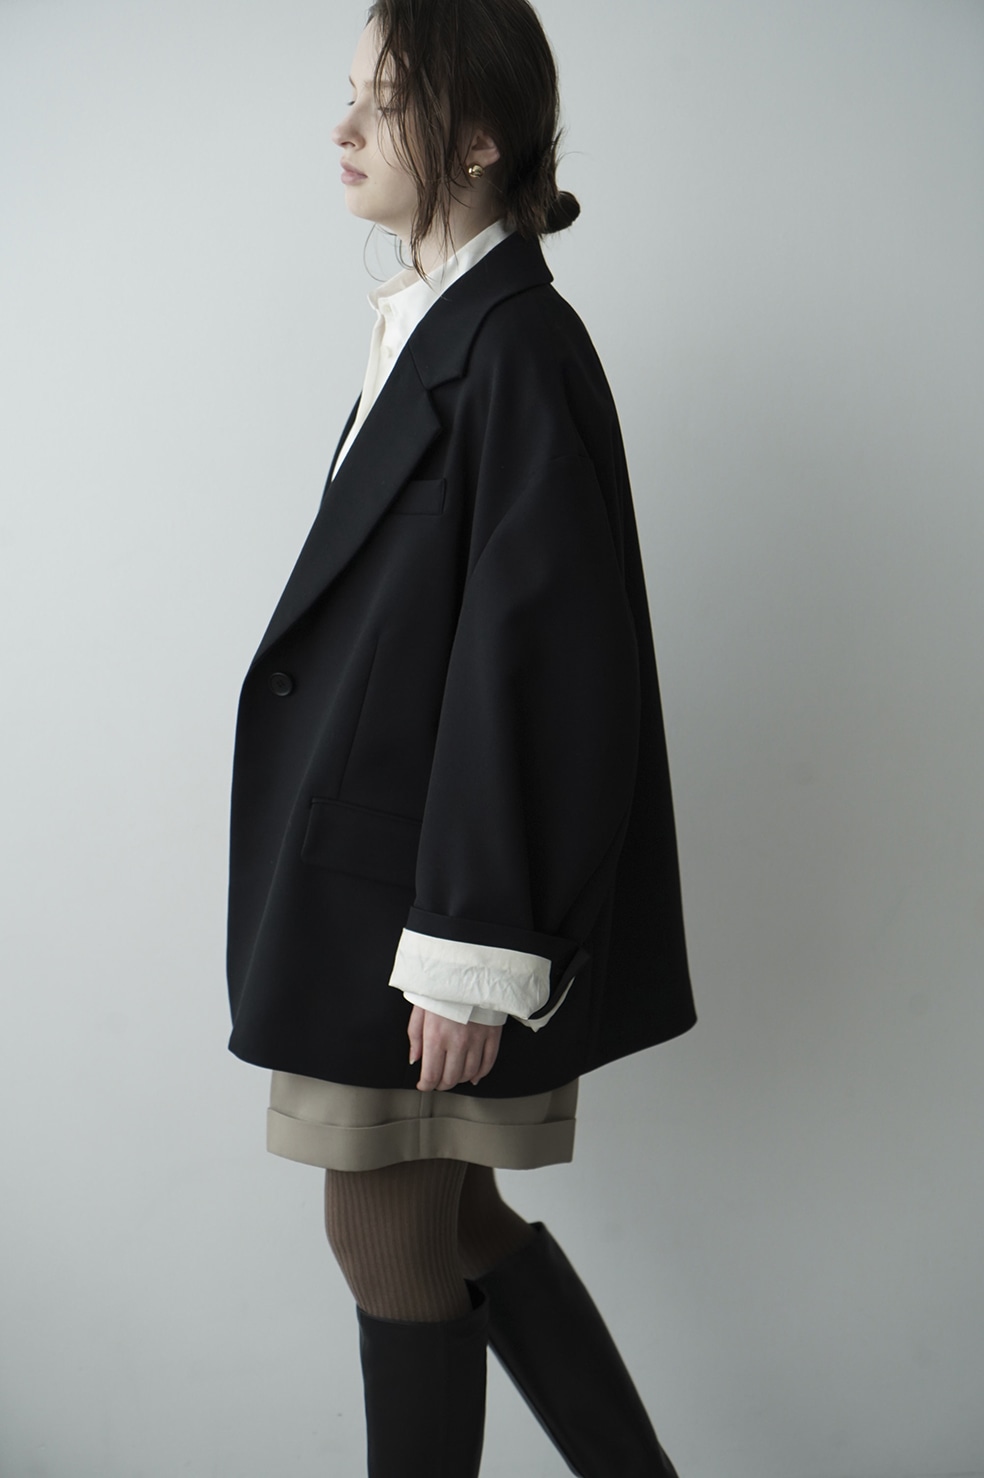 2WAY ARRANGE TAILORED OVER JACKET｜OUTER(アウター)｜CLANE OFFICIAL ...